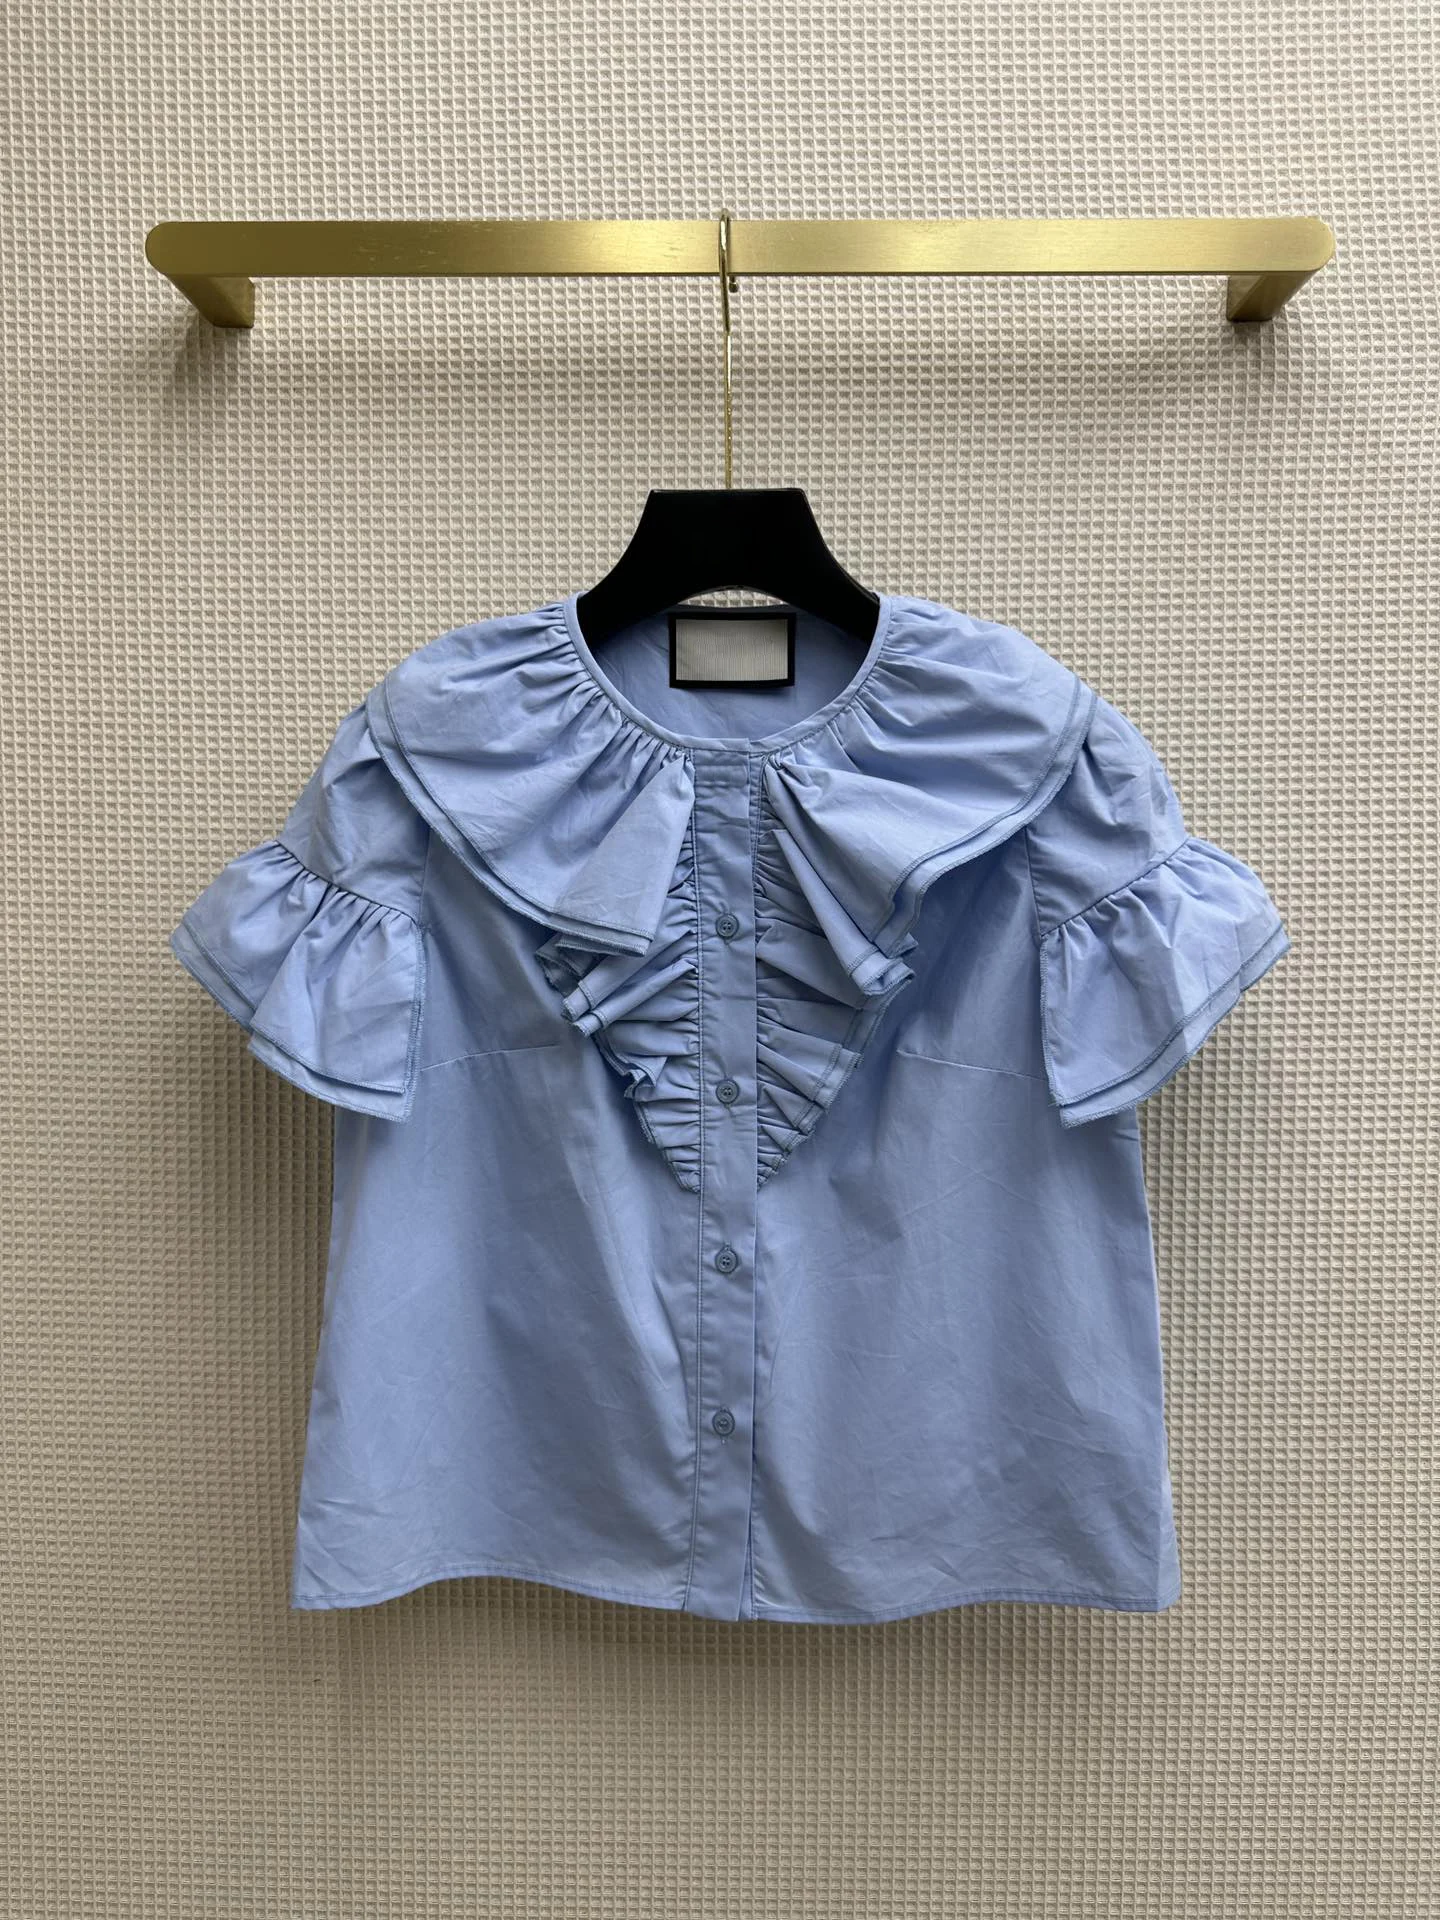 

Spring and summer new ruffled silk shirt ruffled neckline super age reduction overall rich layer6.13